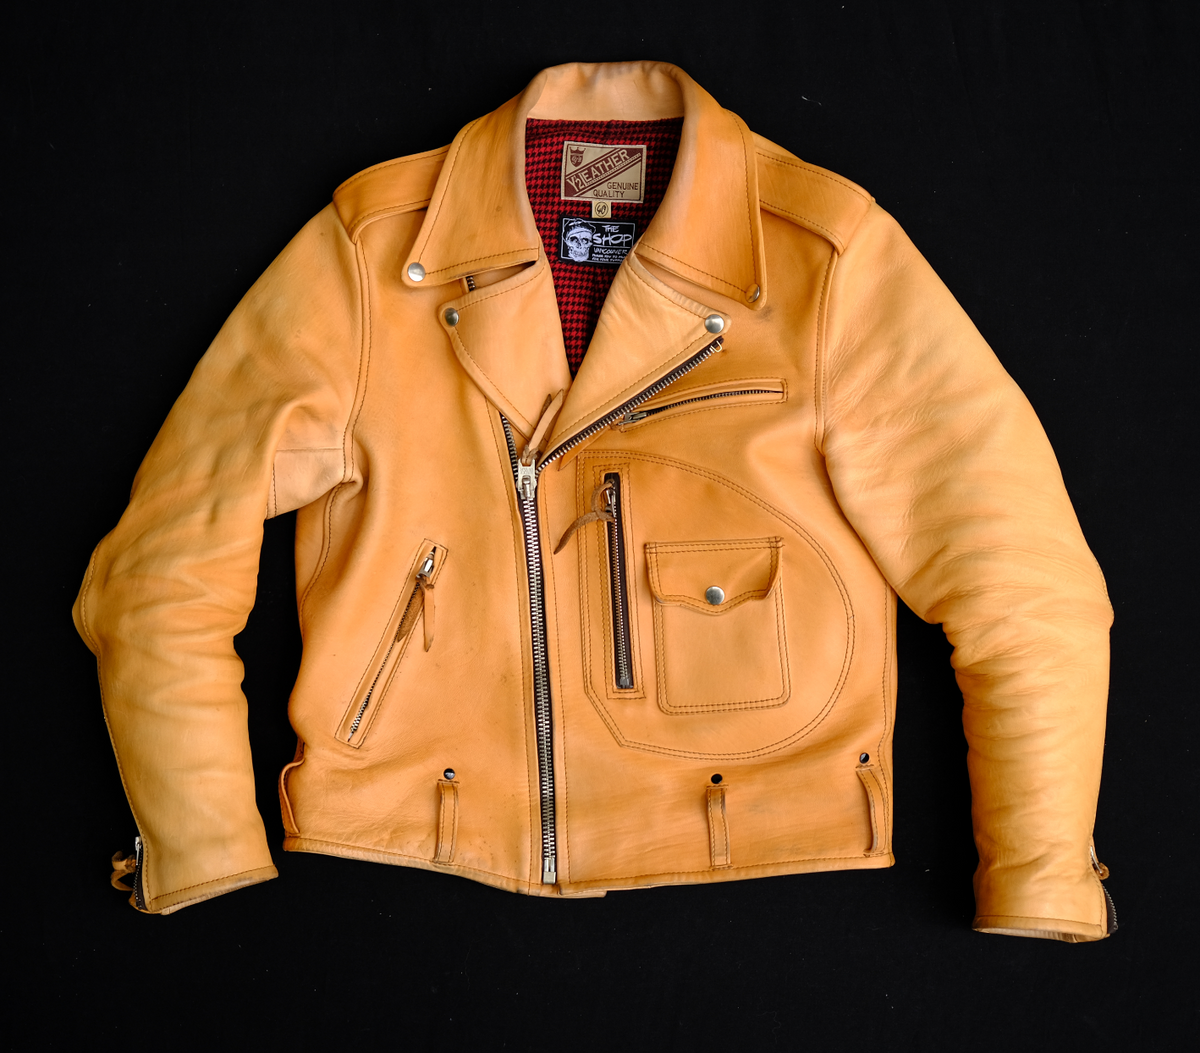 the shop vancouver y2 leather buco horsehide d pocket double riders leather jacket natural 